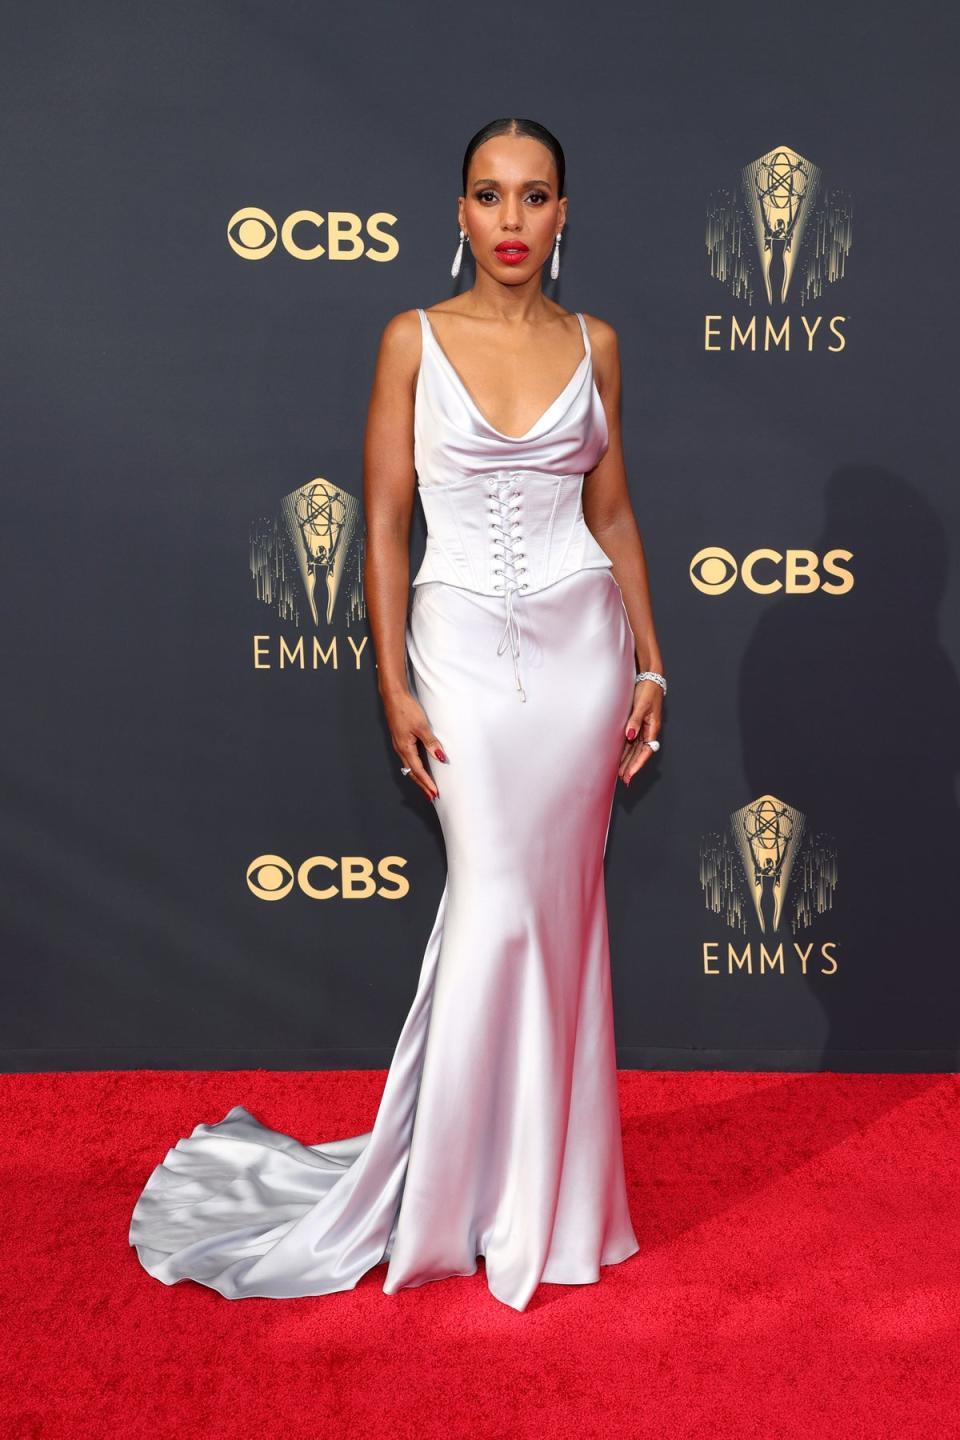 Kerry Washington at the 2021 Emmy Awards (Getty Images)